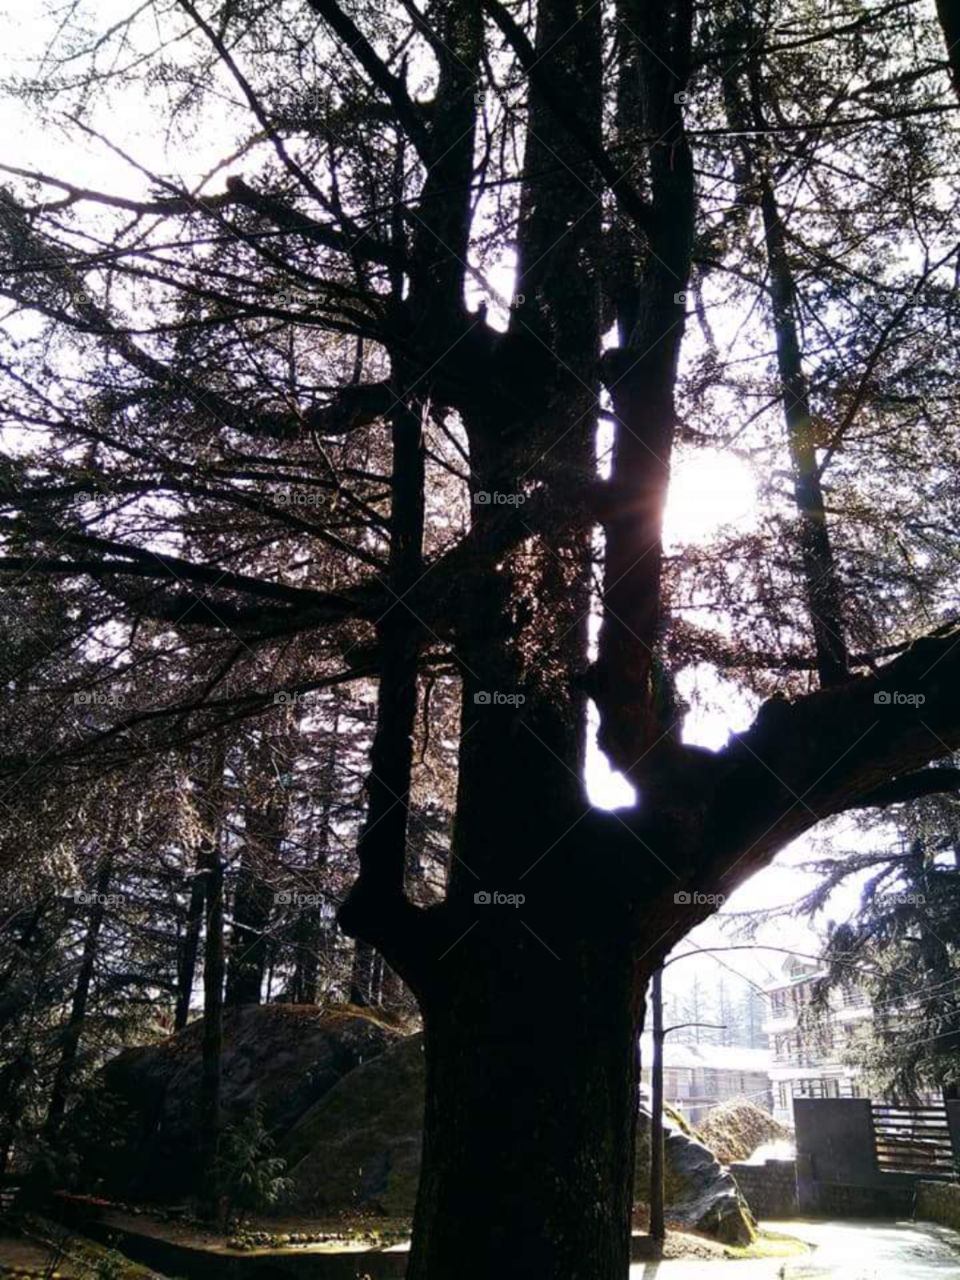 the trees with the branches Green Leaves very big trees having in between the sun rays falling on the ground on the three seas looks very very beautiful cold Himachal Pradesh